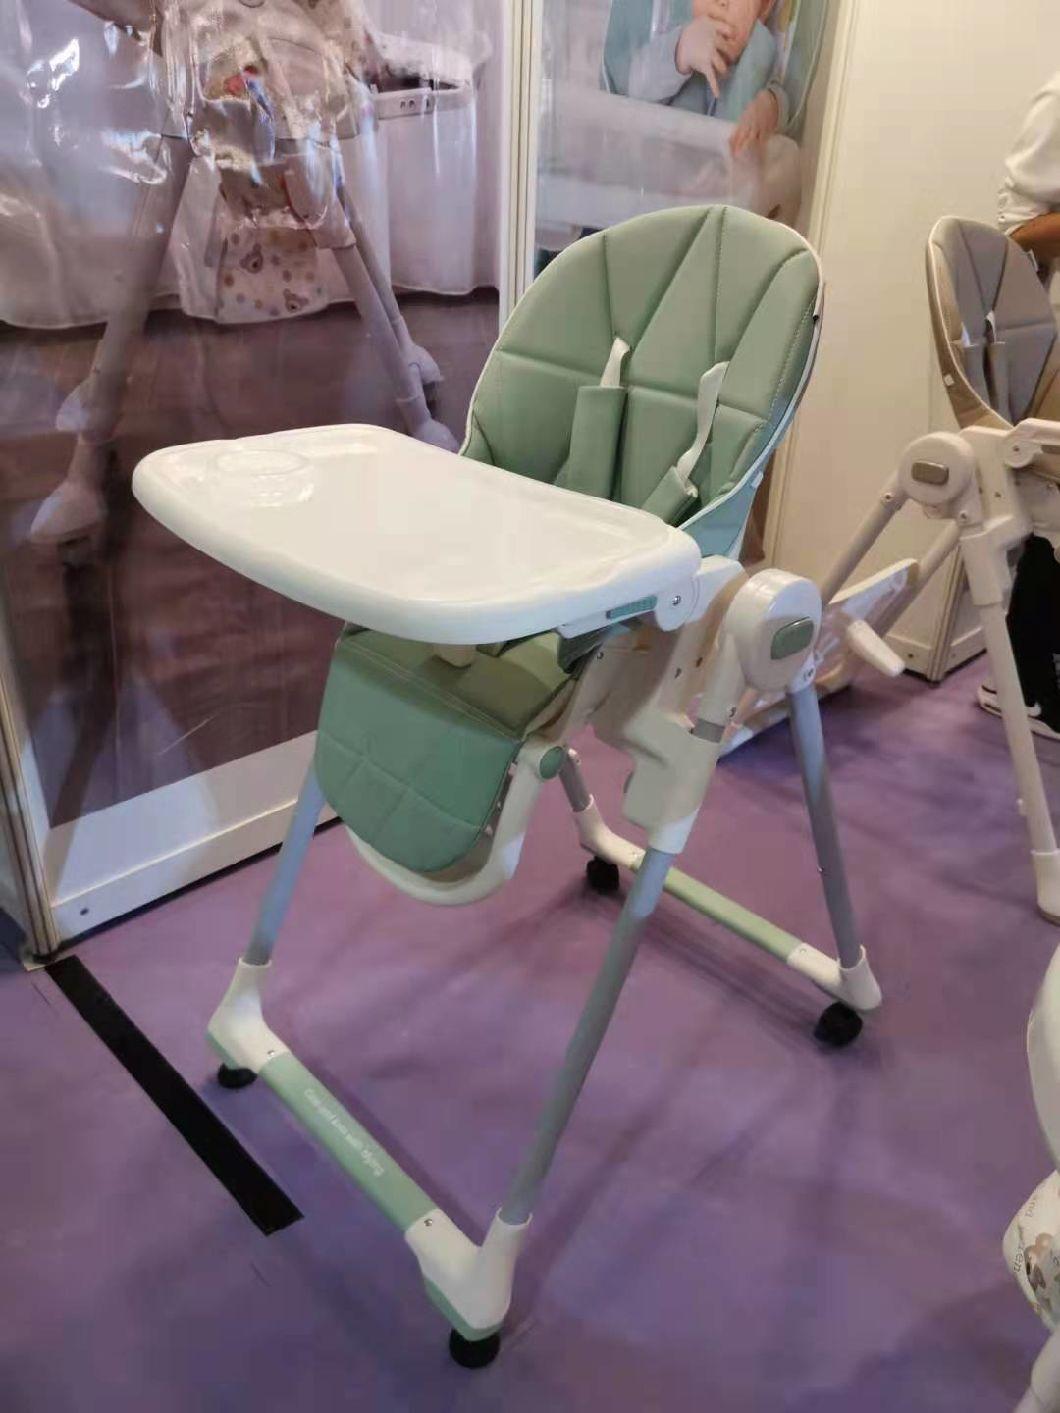 Wooden Baby Elegance Cot Crib Bed for Sale Near Me